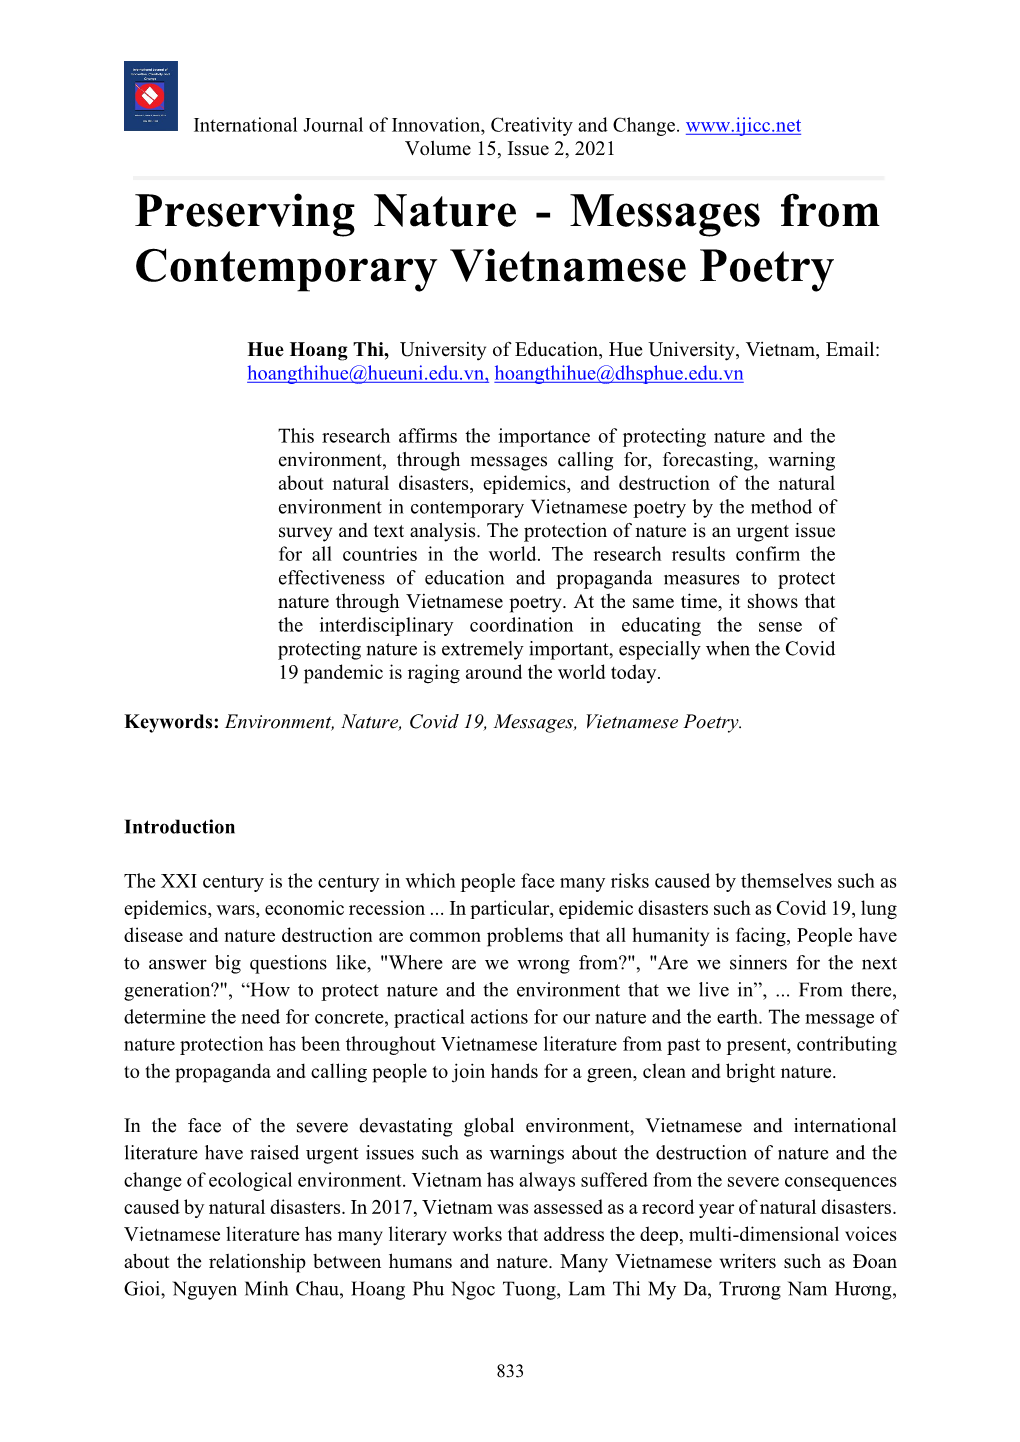 Messages from Contemporary Vietnamese Poetry